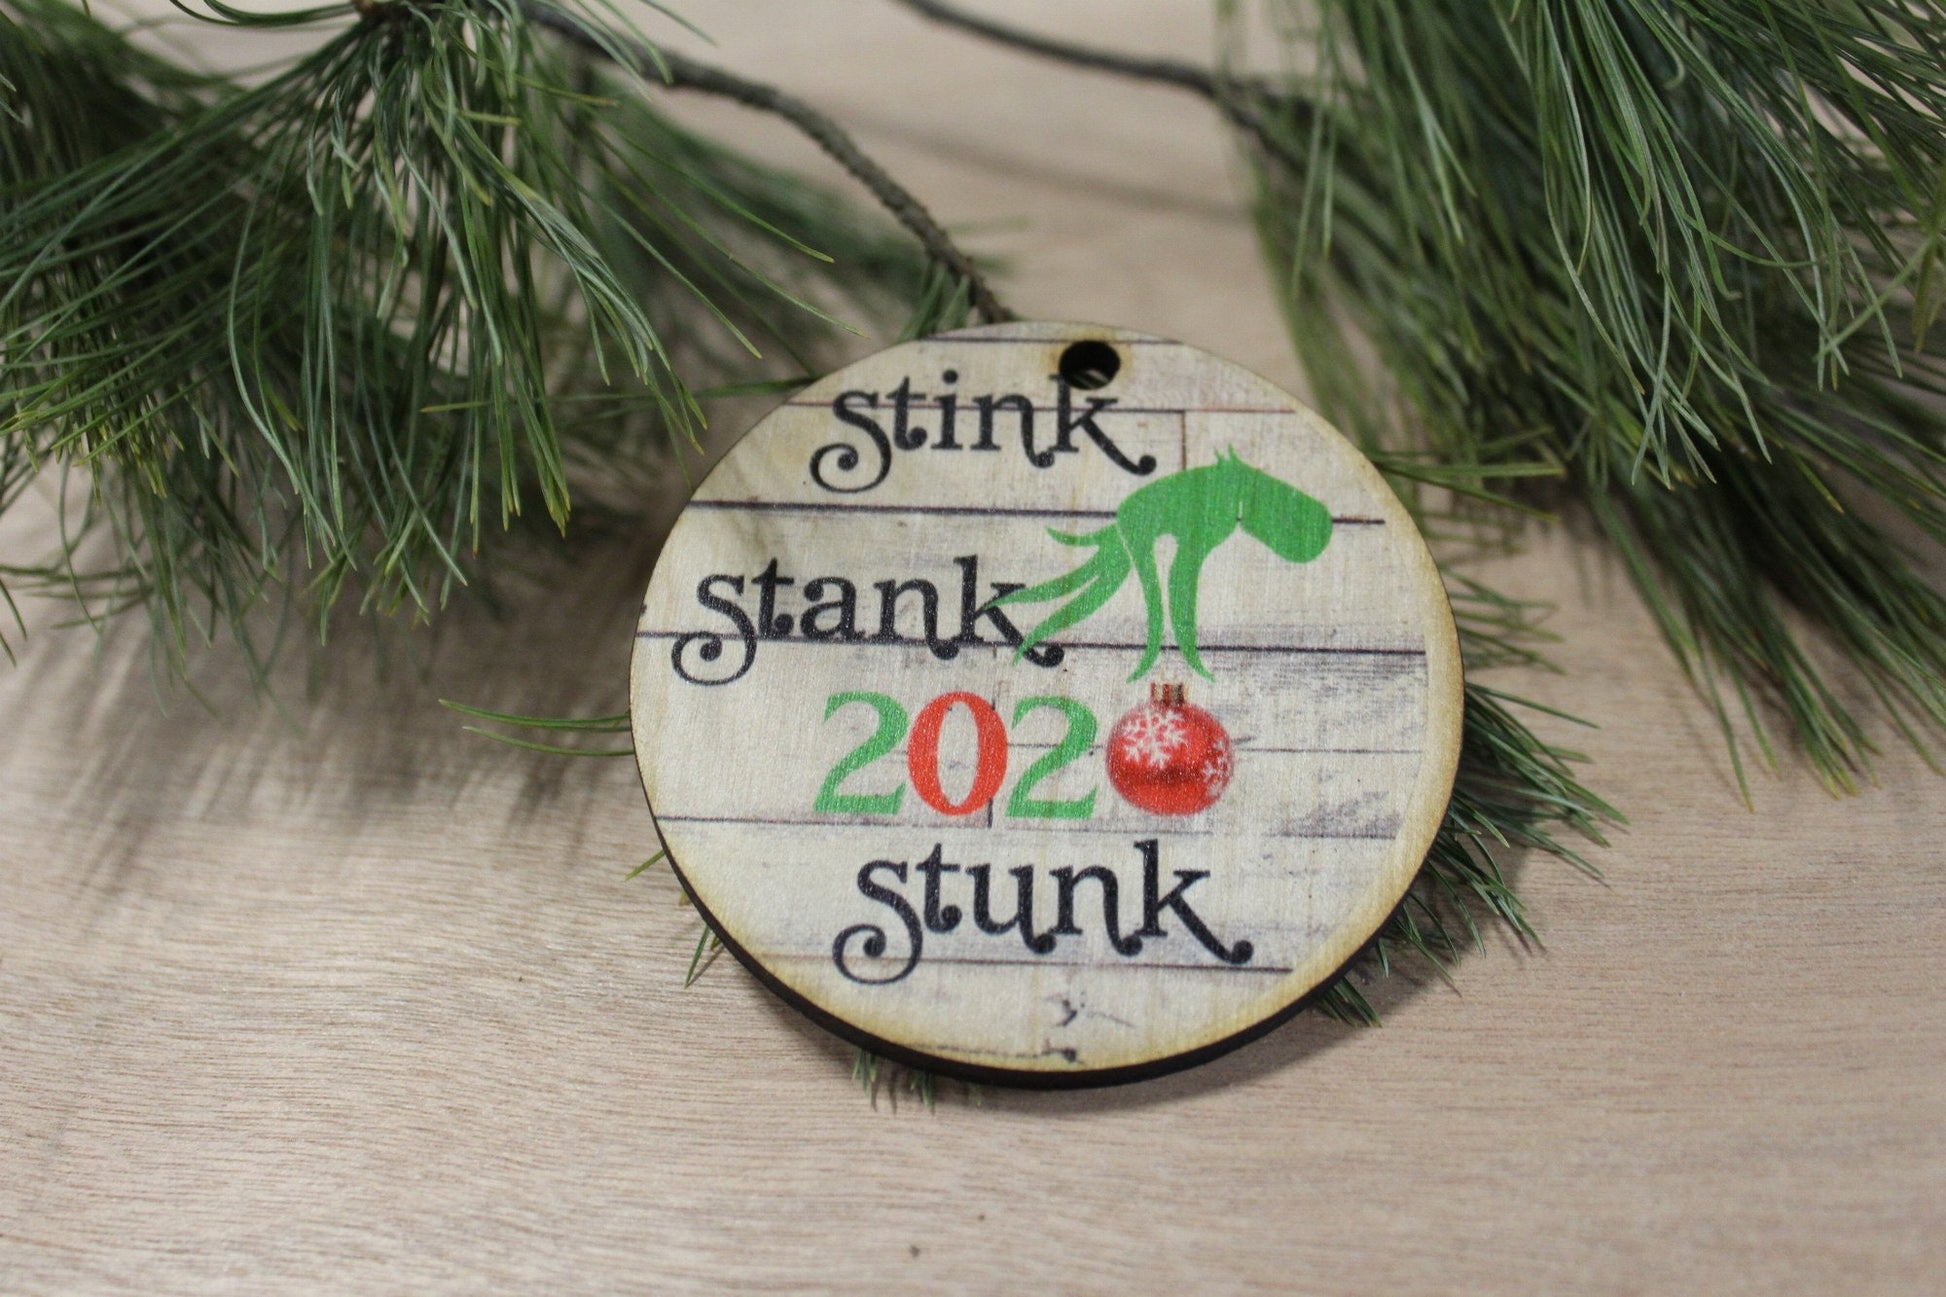 Set of 3 Stink Stank Stunk Ornament 2020 With Date Grouch Christmas Keychain Décor Wood Sign Tree Gift Cute Character Hand Green Festive